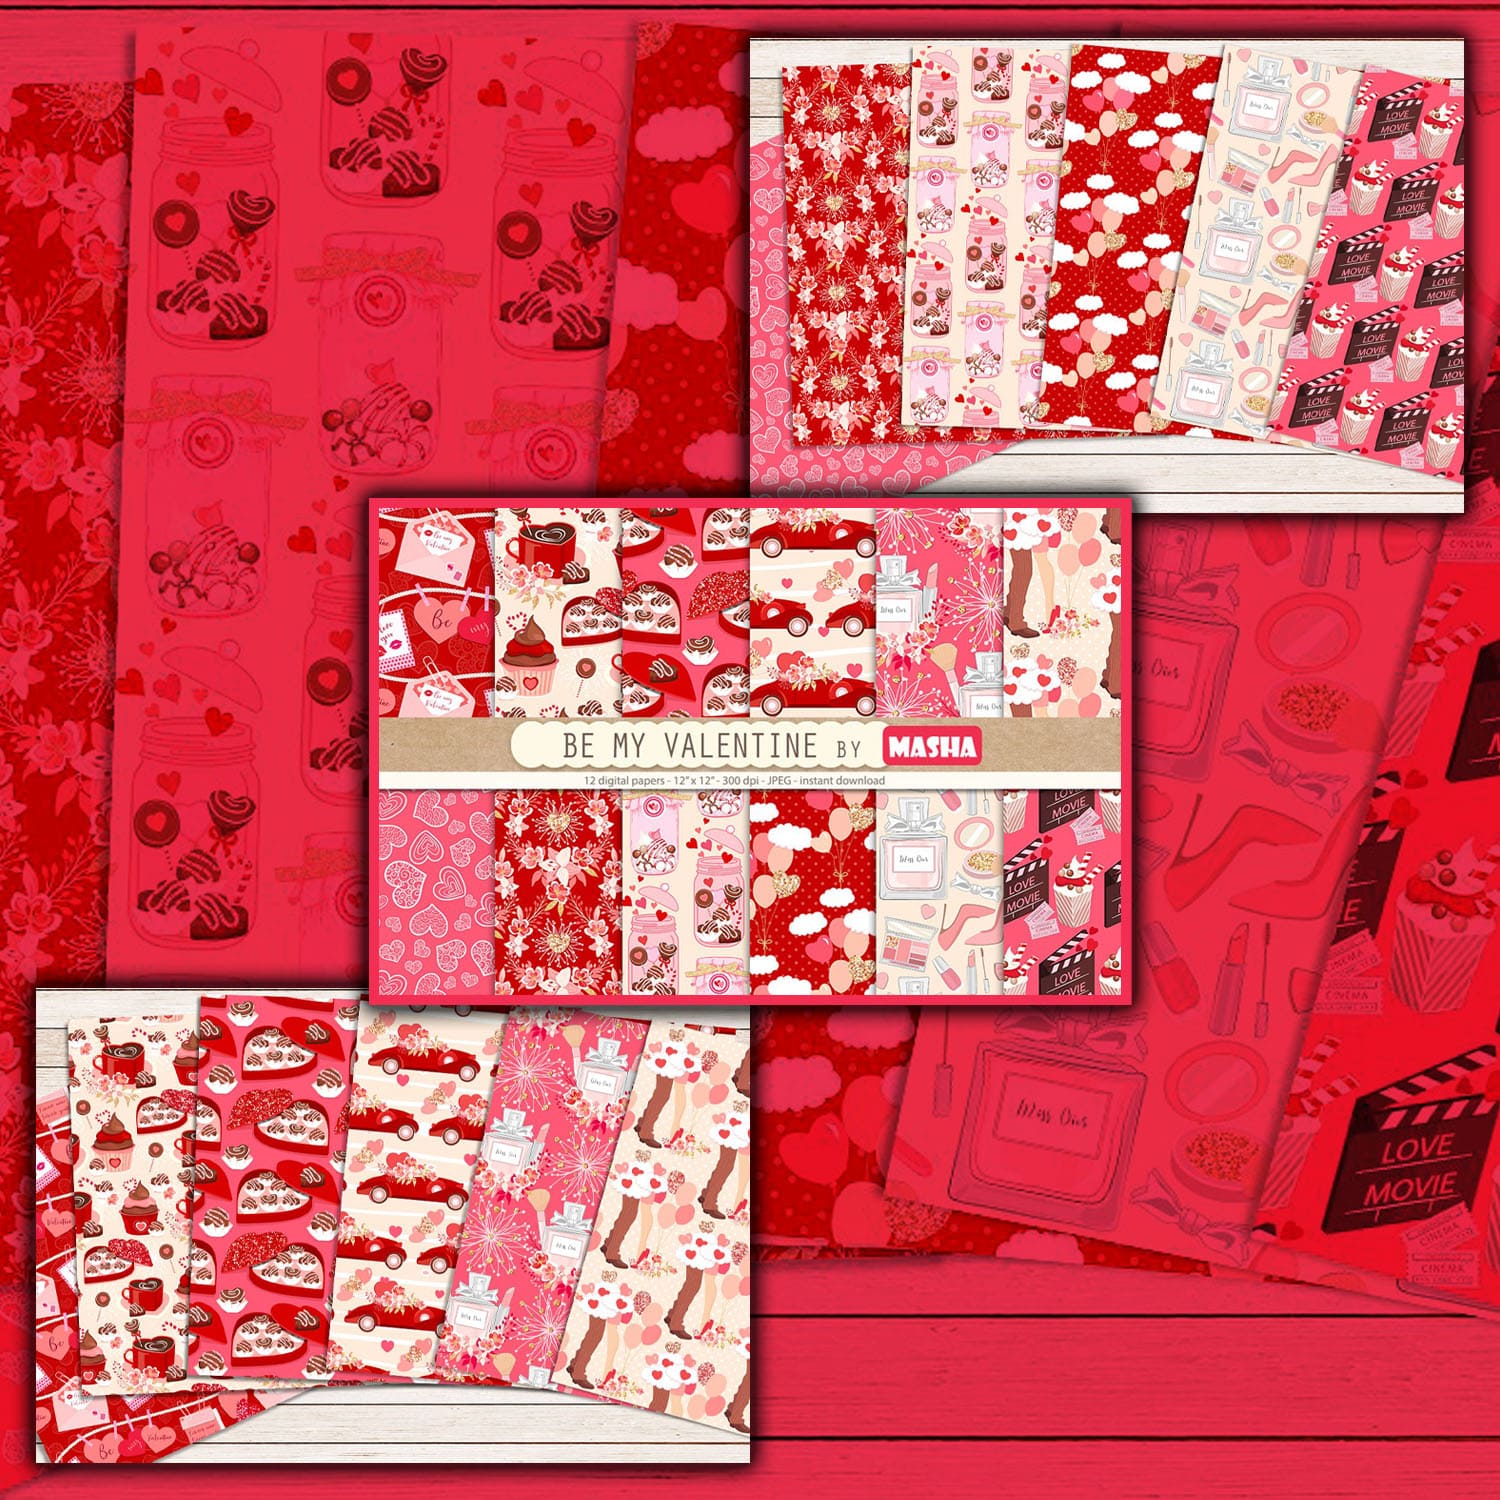 Three pictures with the image of unfolded patterns for Valentine's Day.